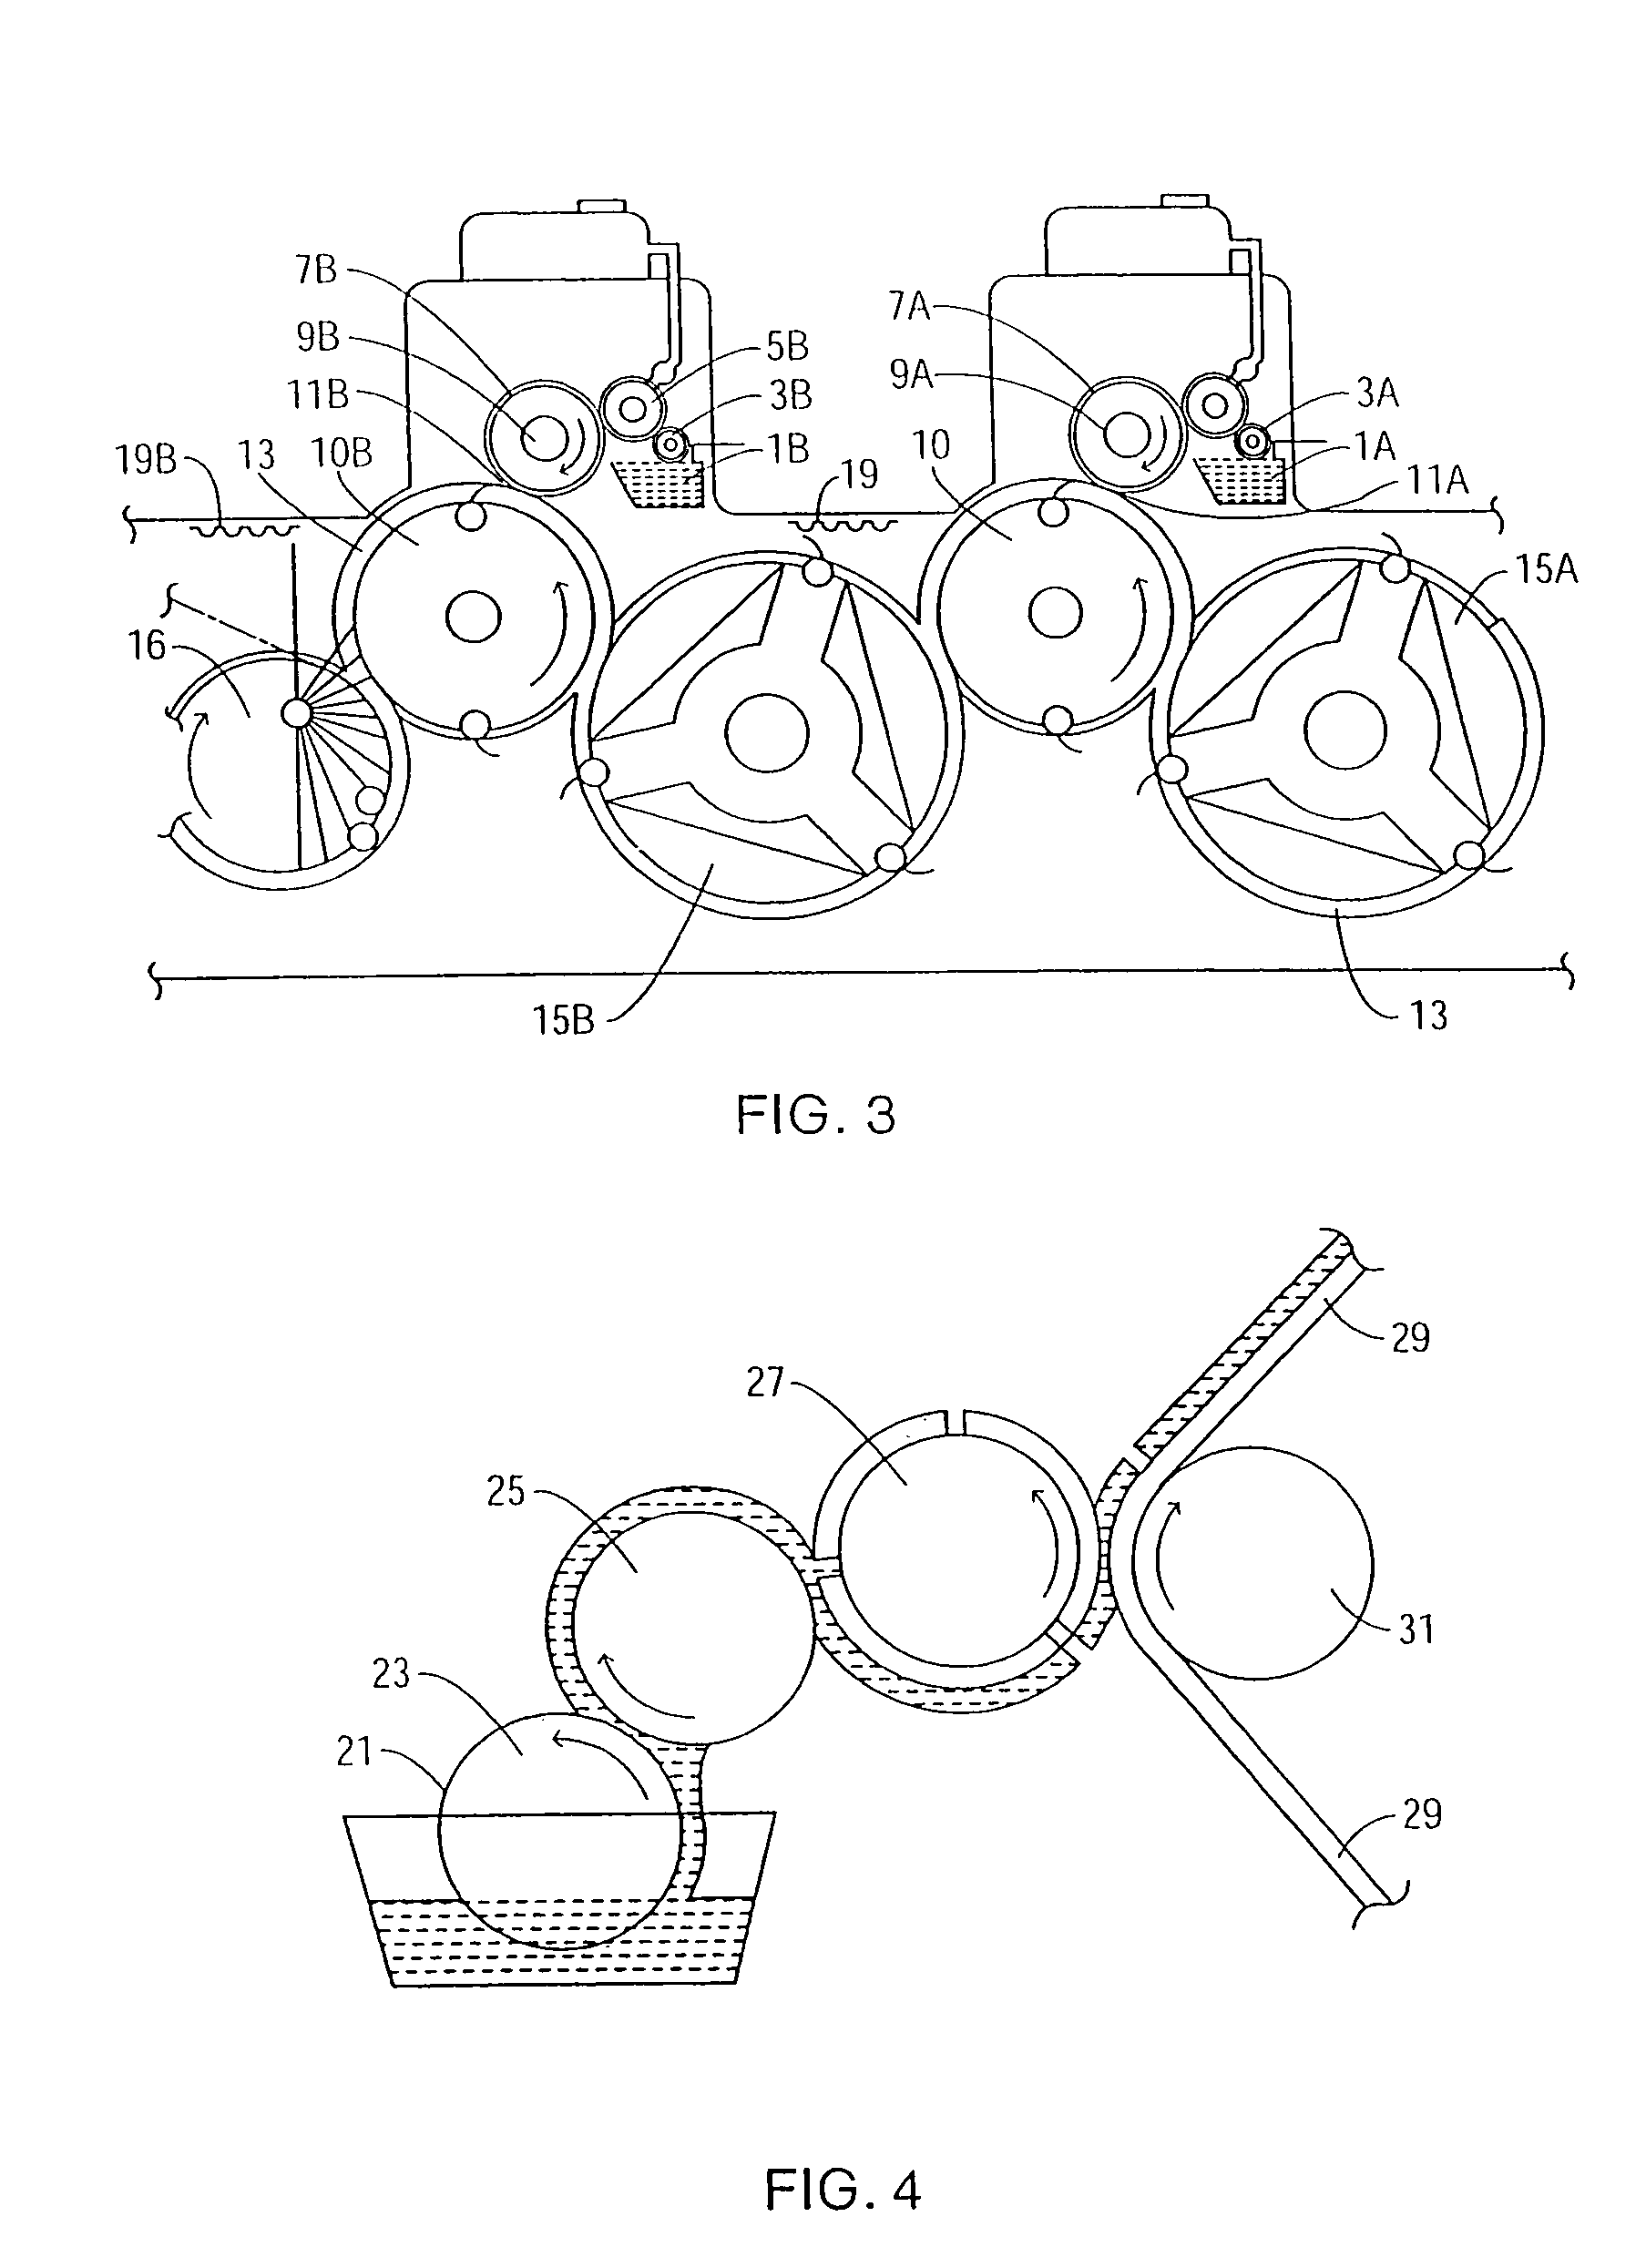 Method of producing a high gloss coating on a printed surface